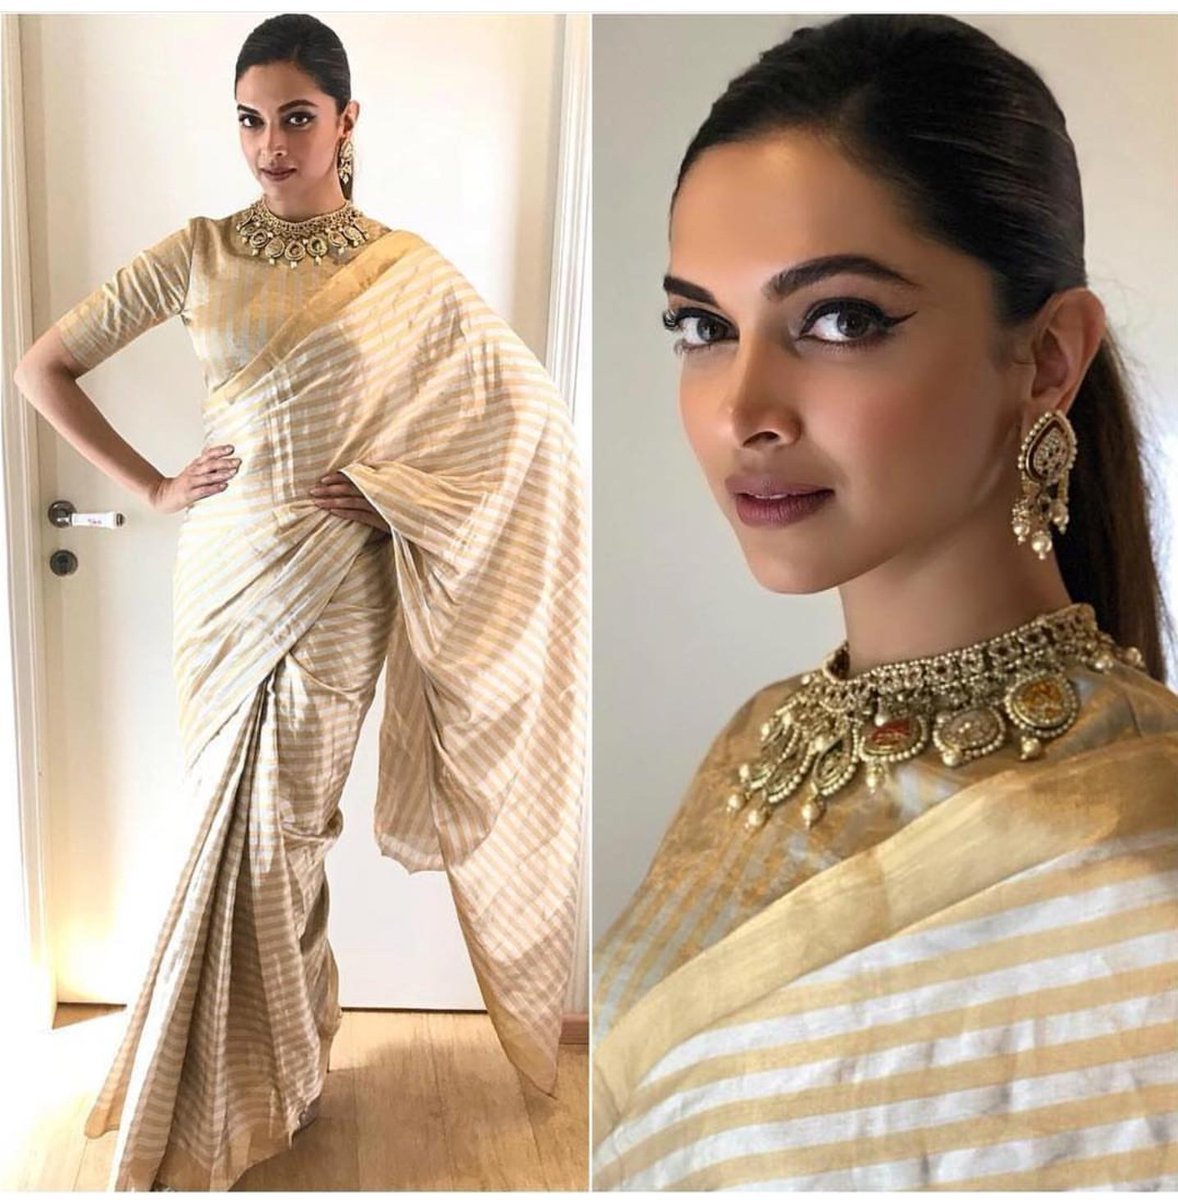 DP wore an off-white golden stripes design cotton silk saree from Raw Mango which she paired with matching high neck blouse.